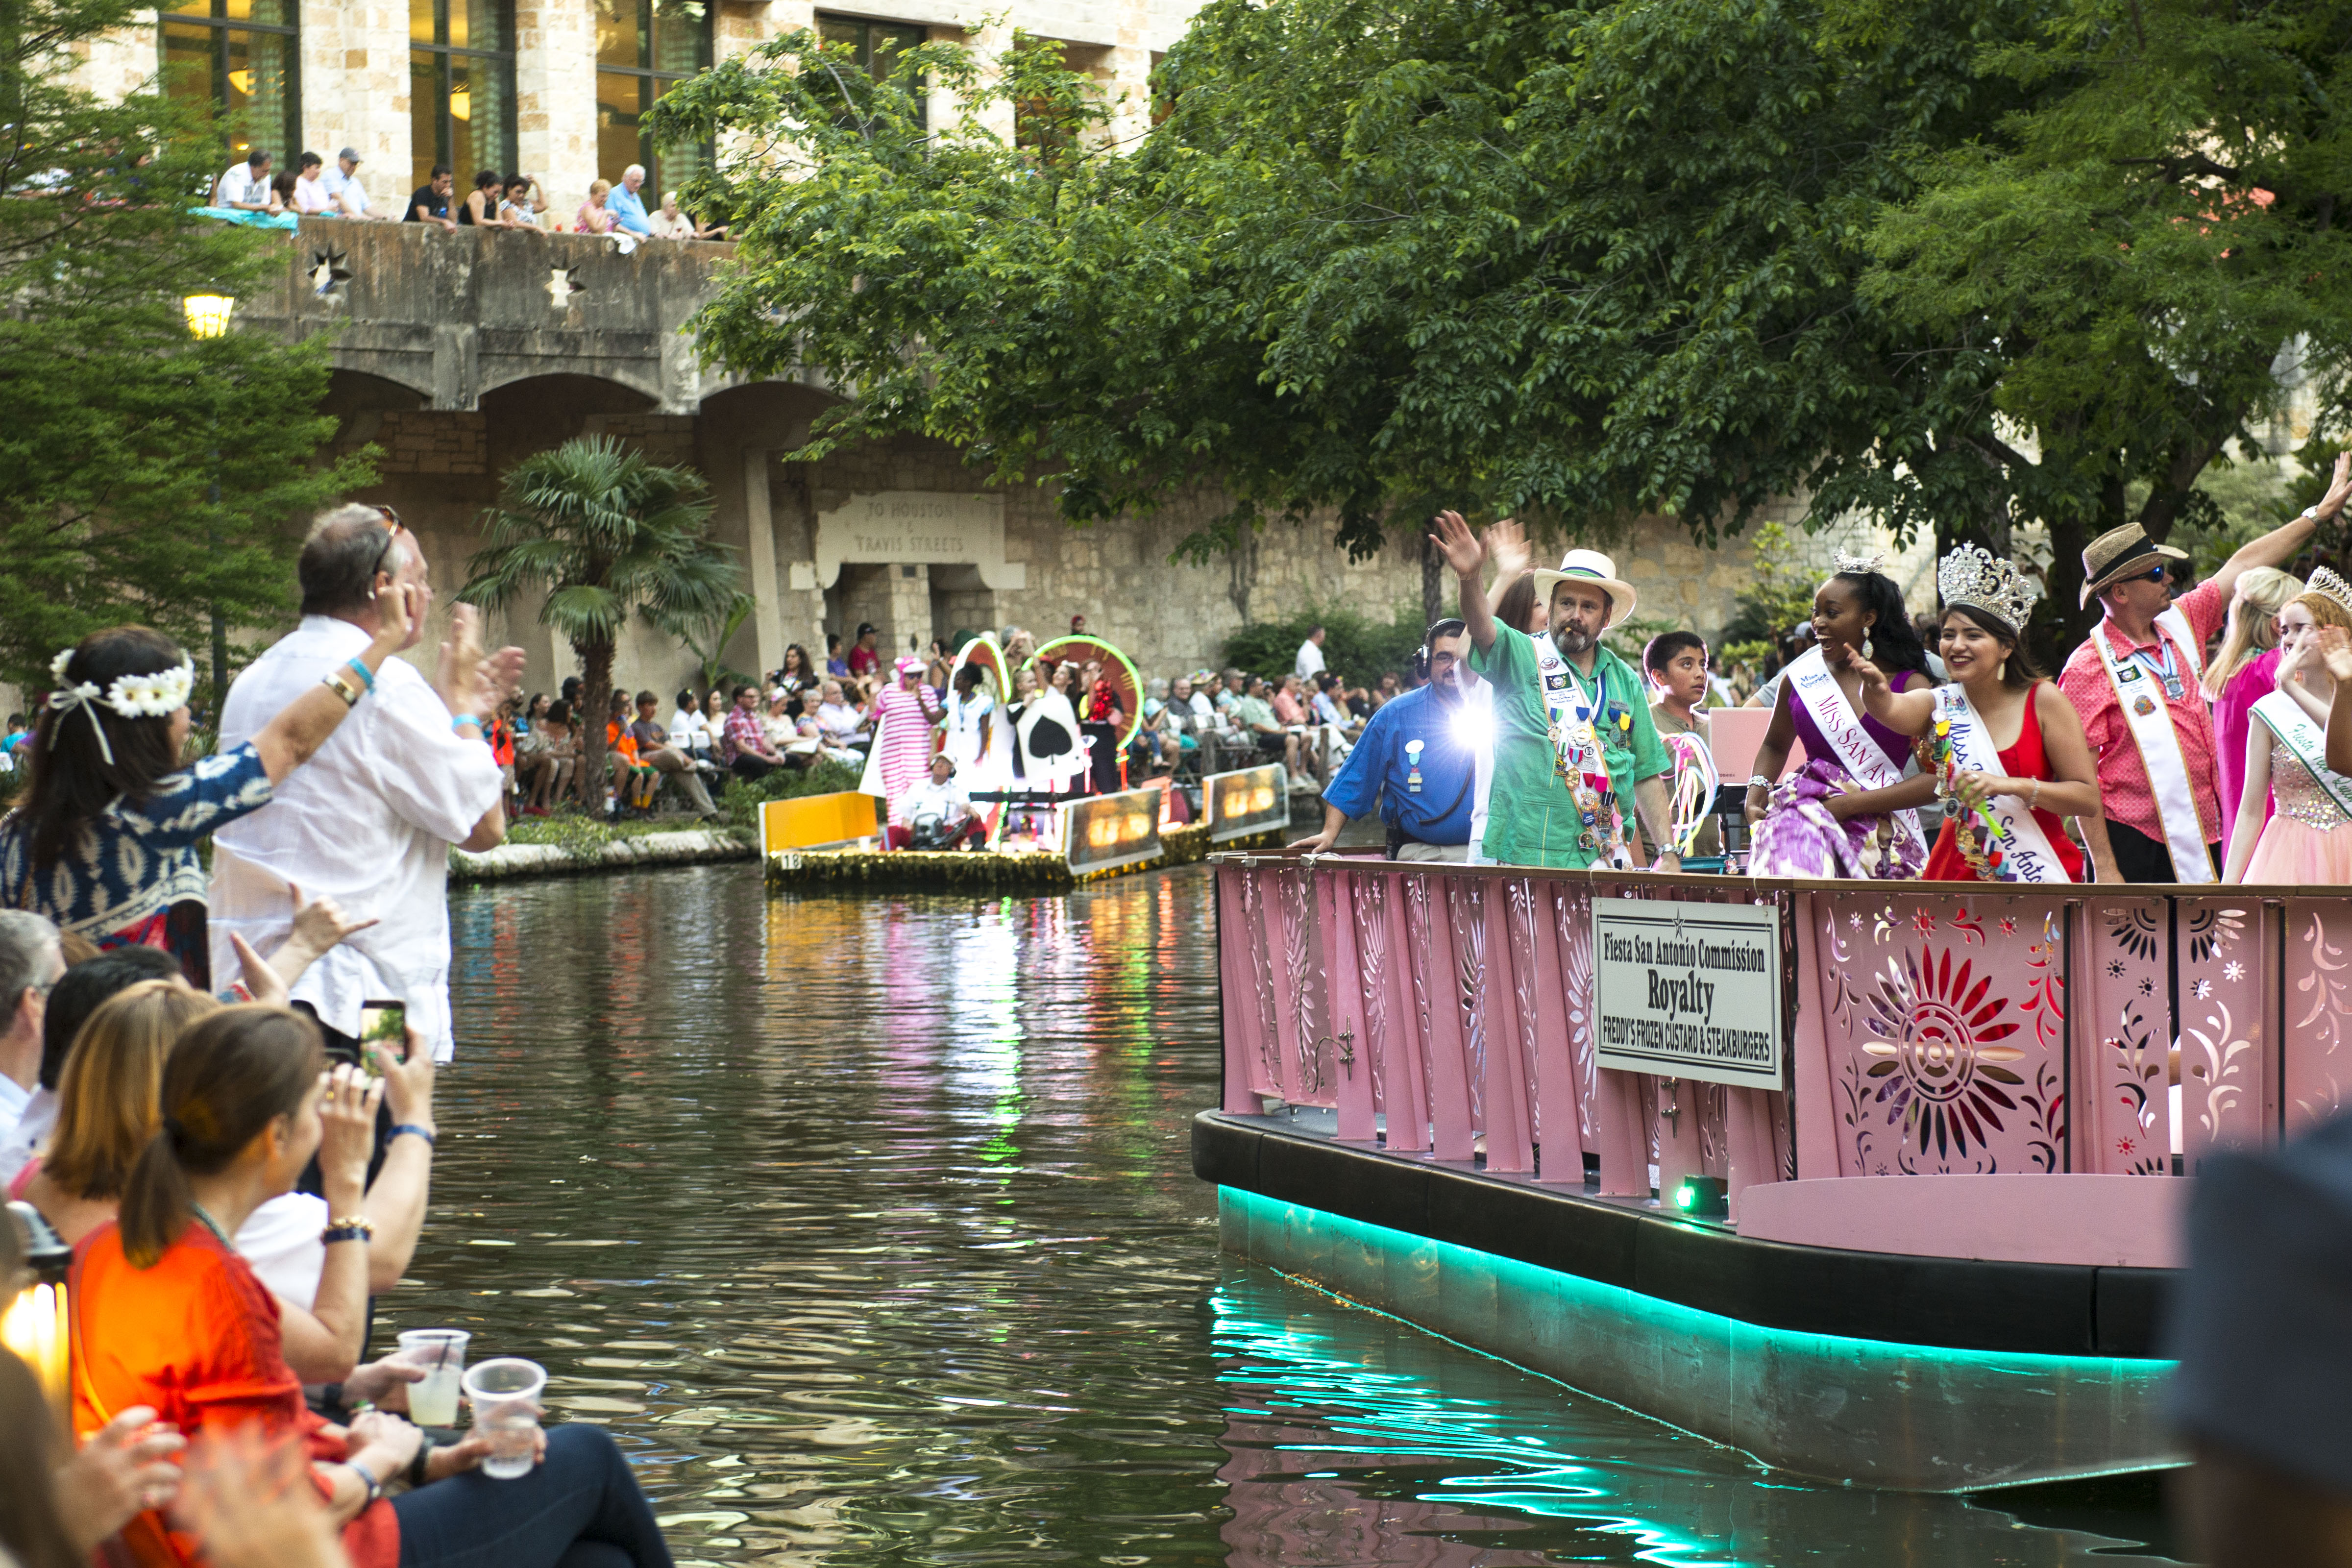 Crowds applauding during a river boat parade in the San Antonio river